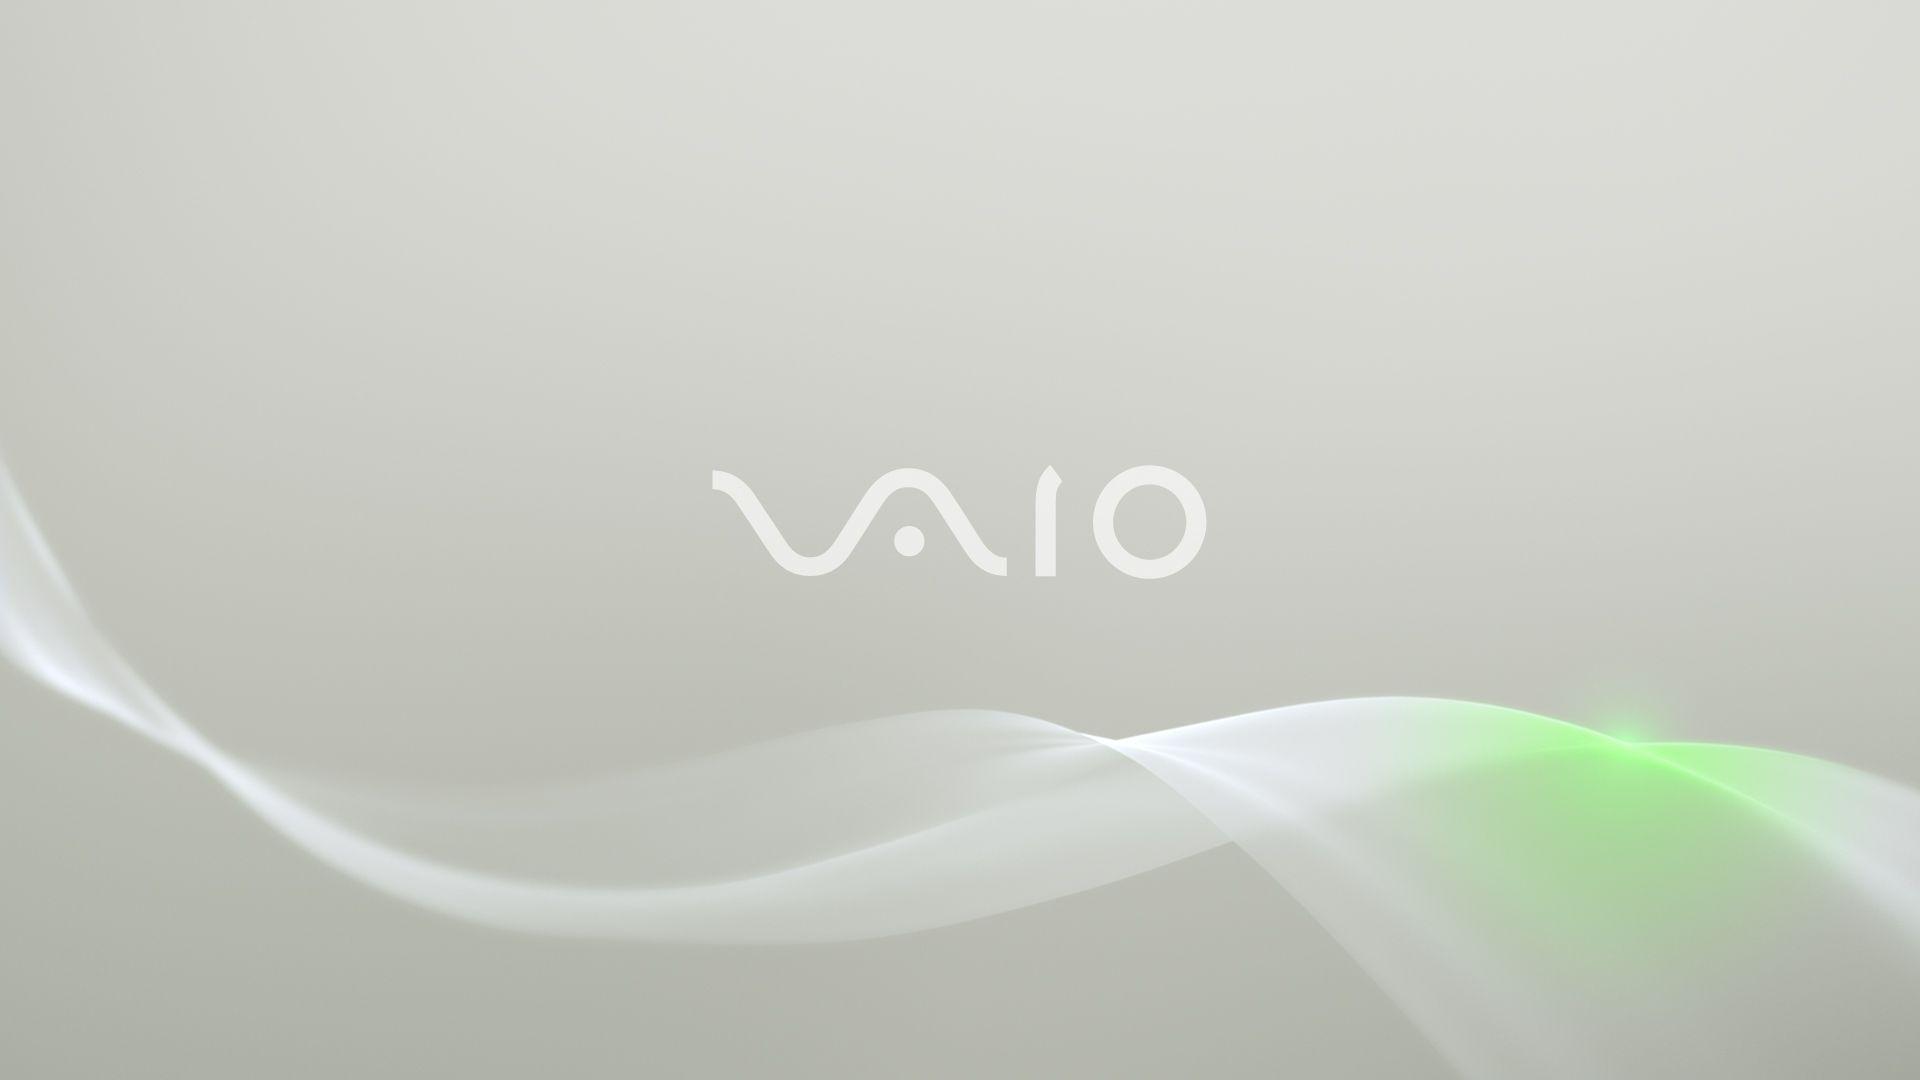 Cool Sony Vaio Laptop Wallpapers Top Free Cool Sony Vaio Laptop Backgrounds Wallpaperaccess